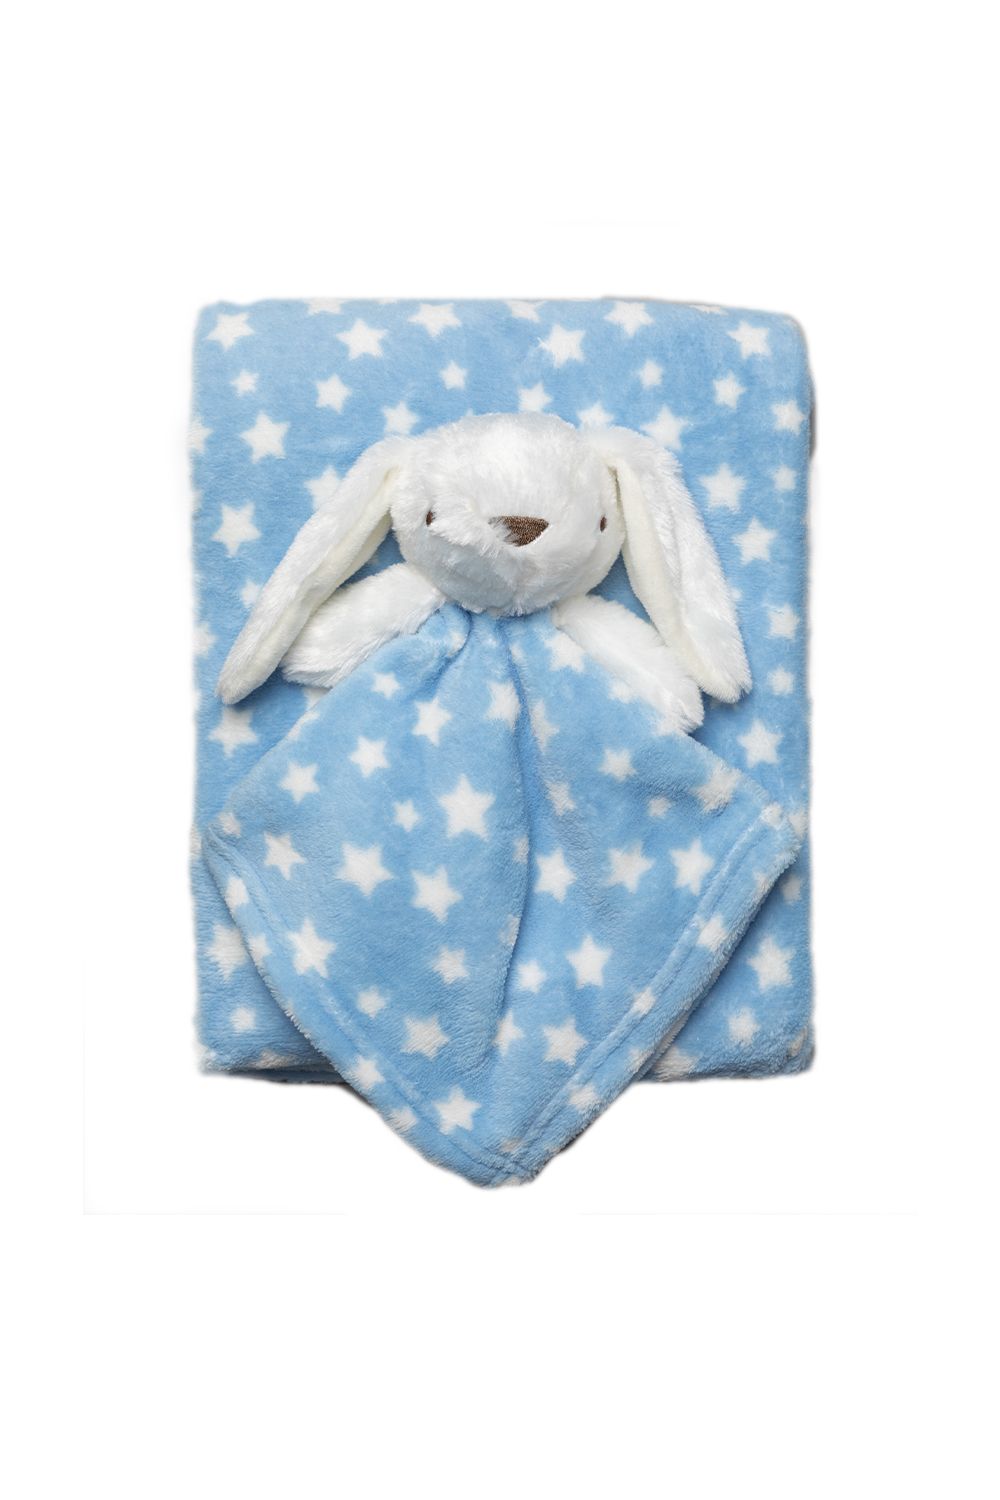 This adorable Snuggle Tots comforter and blanket set make the perfect gift for the little one in your life. The two-piece set features a gorgeous, fluffy blanket with a white star print all over, and a comforter with the same print with a cuddly bunny toy attached. This set makes a lovely baby shower present.